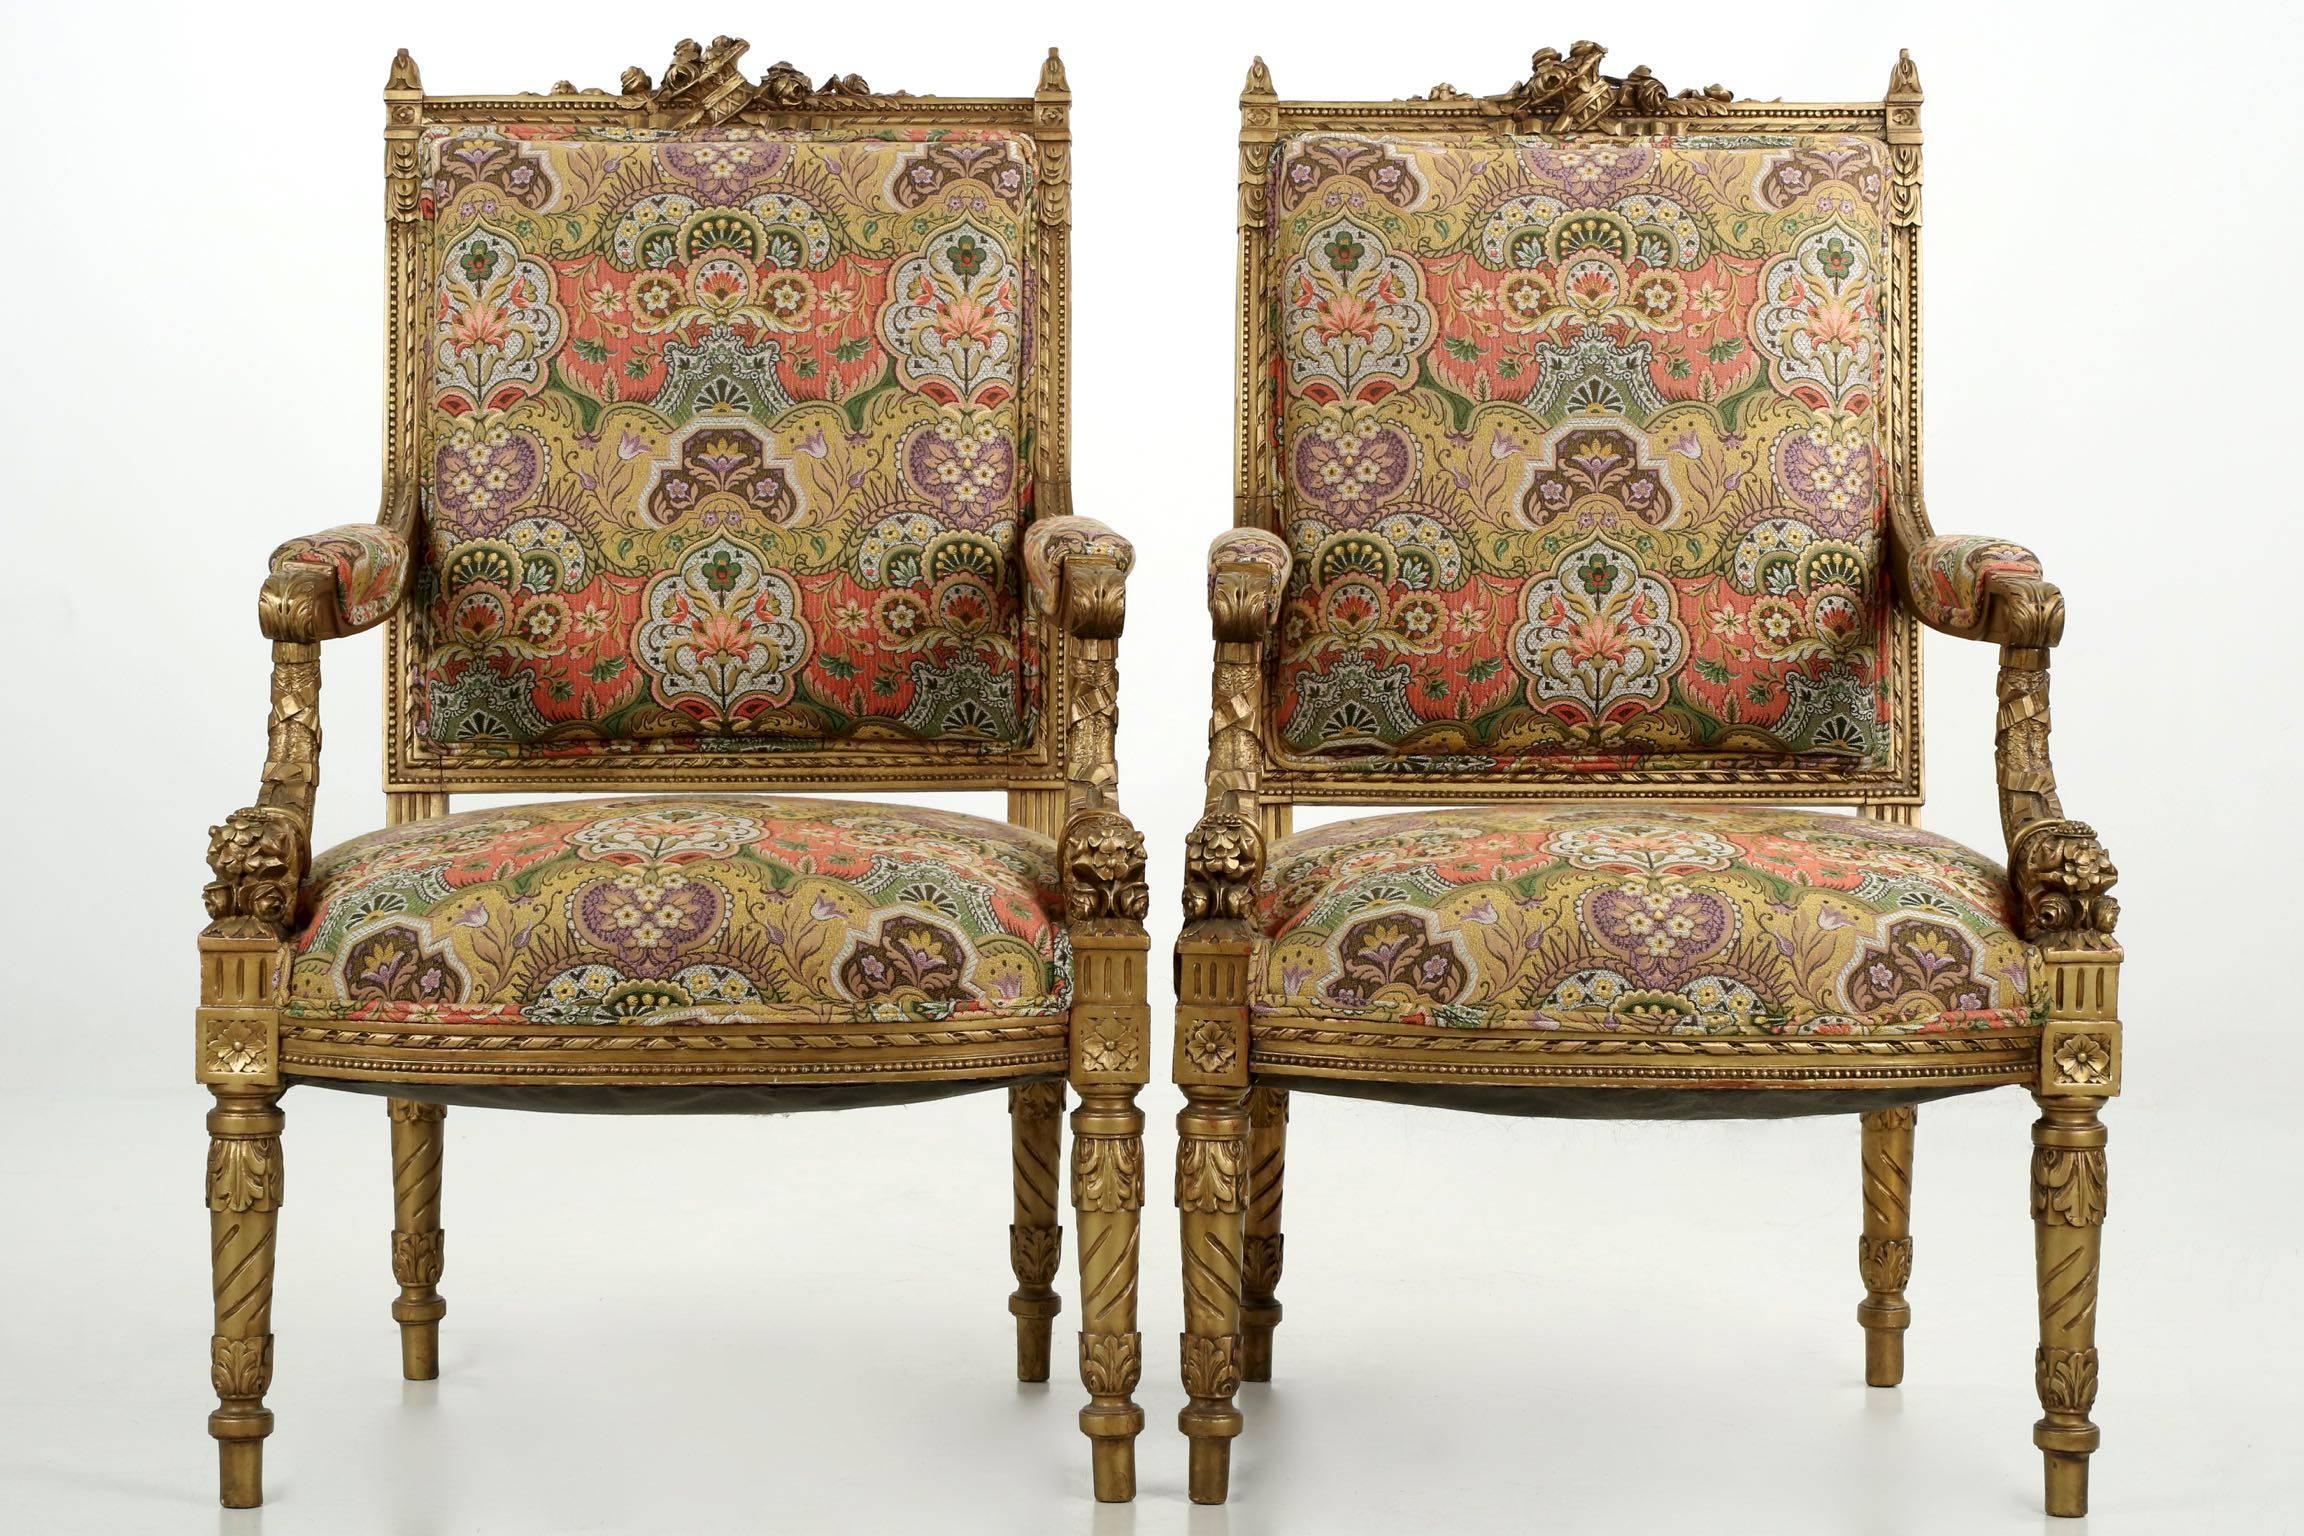 A richly embellished salon suite comprised of a settee and two matching arm chairs from the second quarter of the twentieth century, the detailed and complex surface carvings are quite nicely executed throughout. The pierced floral displays on the